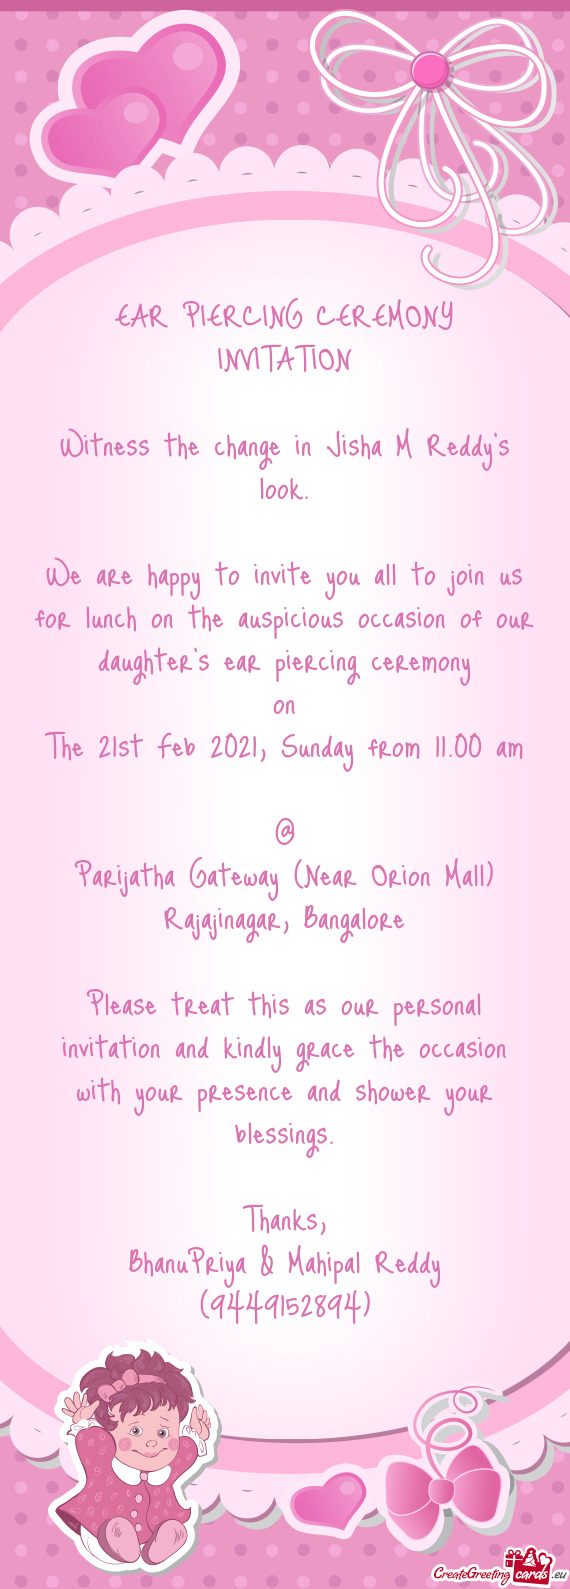 We are happy to invite you all to join us for lunch on the auspicious occasion of our daughter